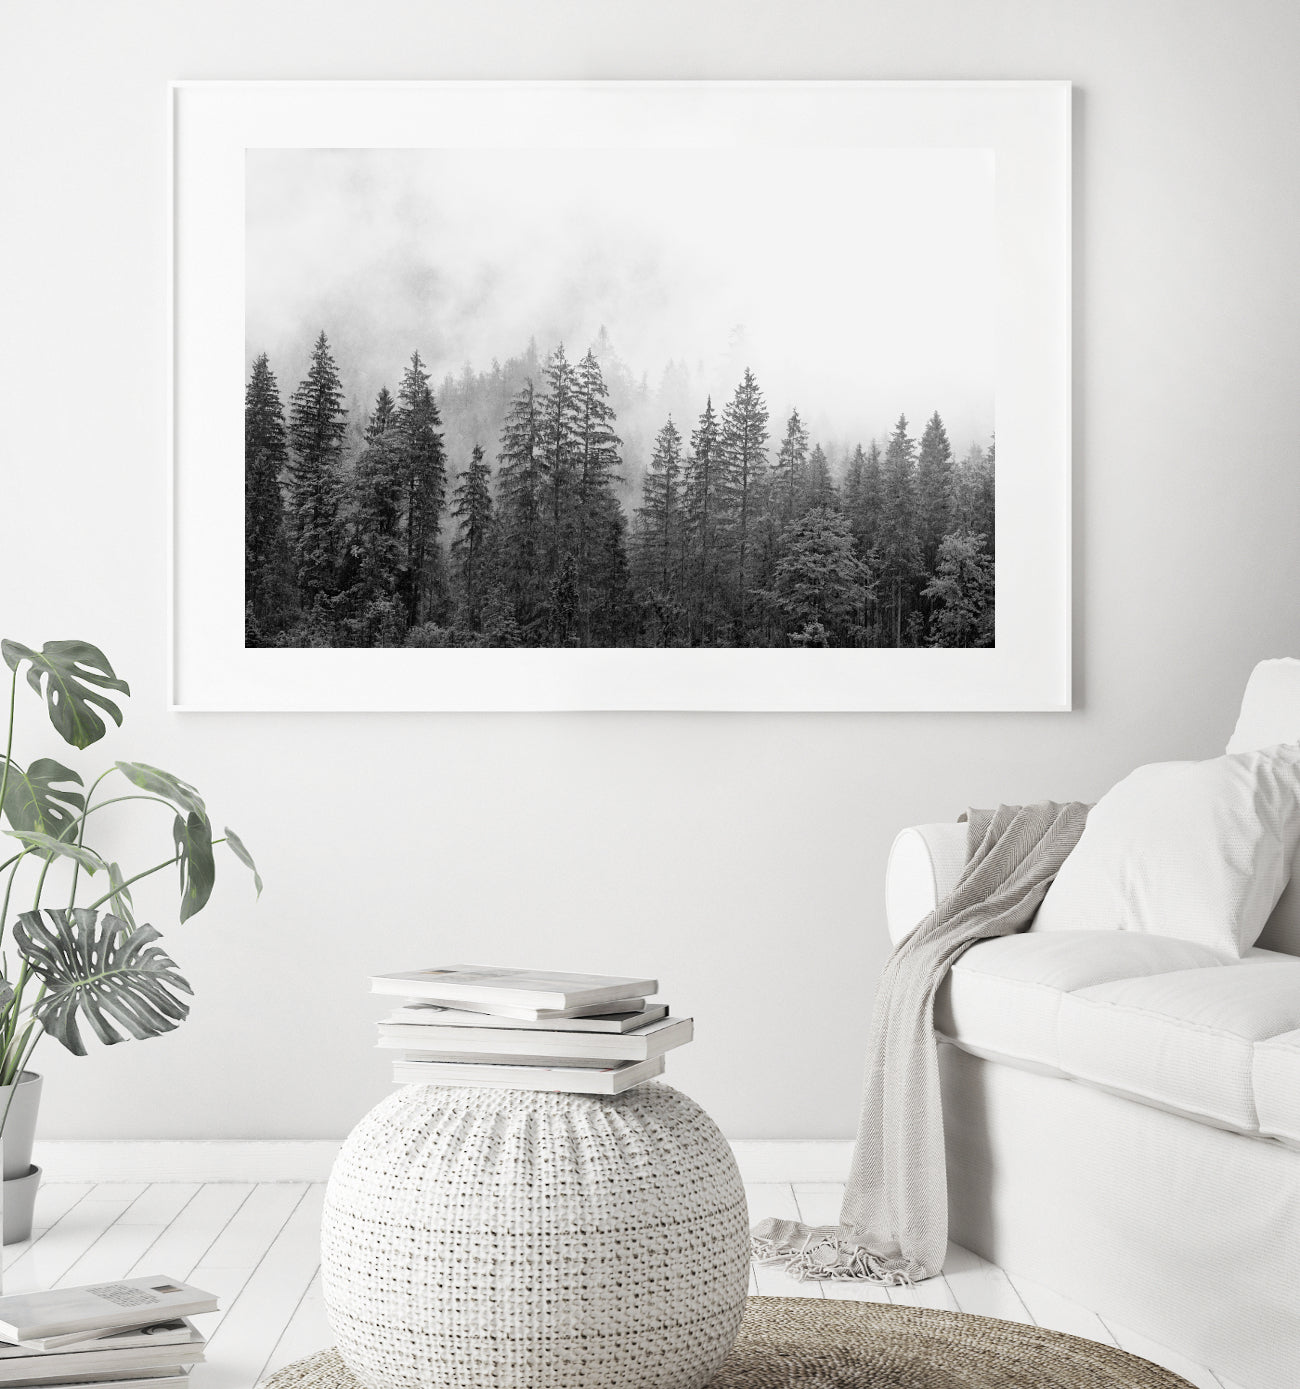 Black & White Nature Wall Art, Forest Photography Print, Large Nordic Wall Decor | arrtopia